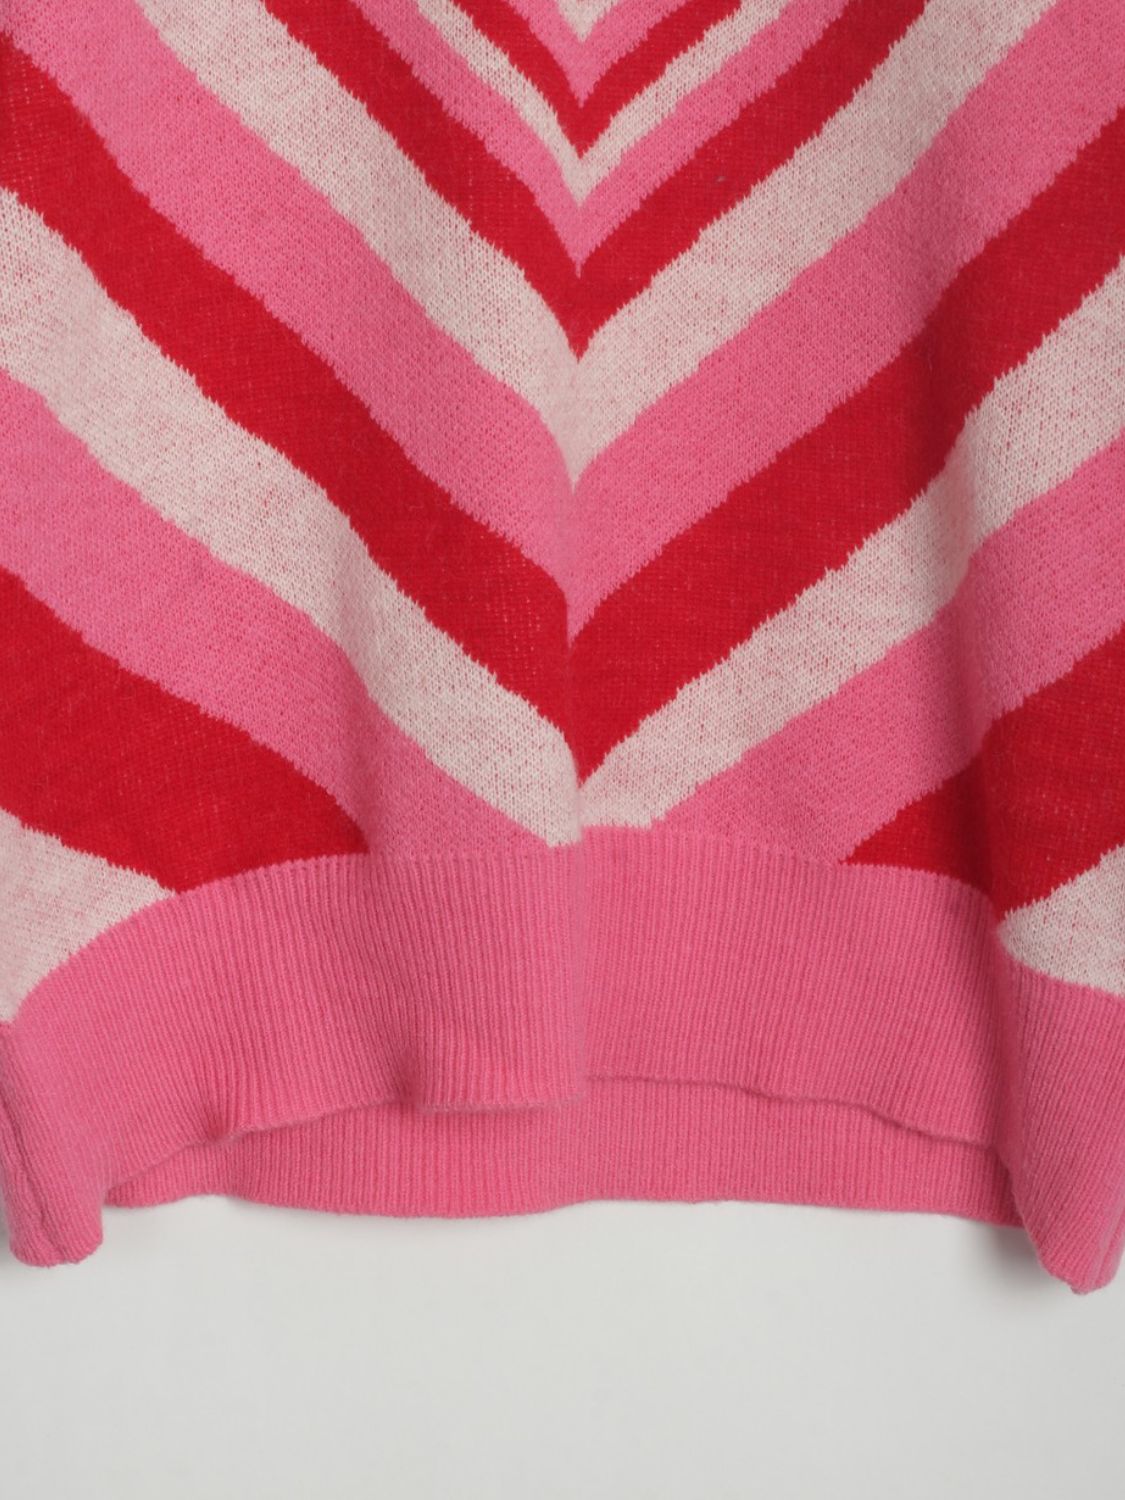 Heart Dropped Shoulder Sweater